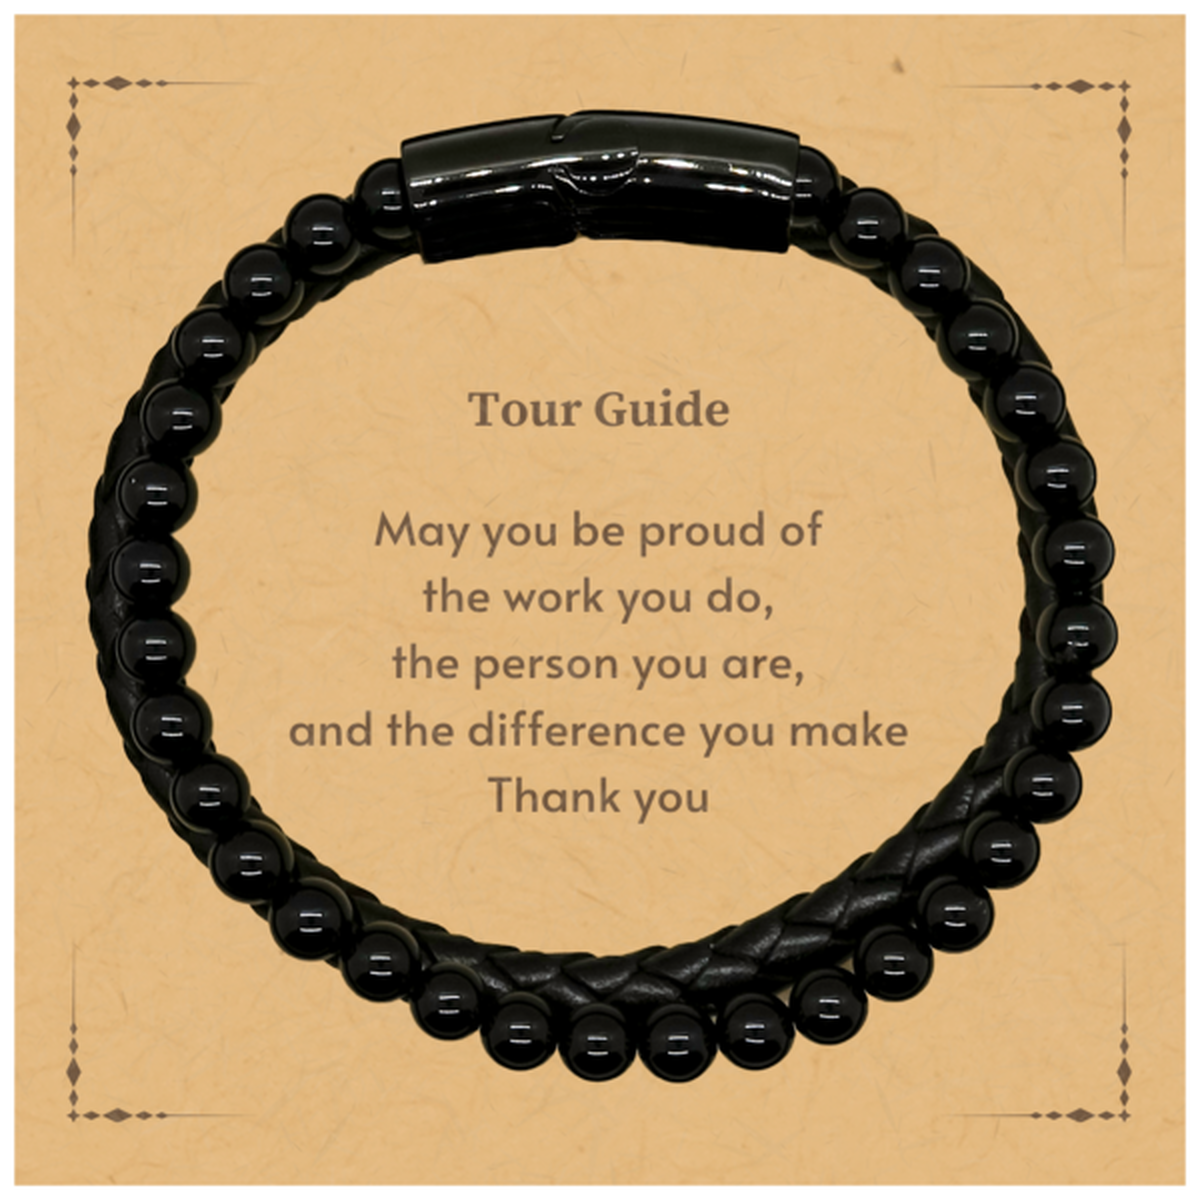 Heartwarming Stone Leather Bracelets Retirement Coworkers Gifts for Tour Guide, Tour Guide May You be proud of the work you do, the person you are Gifts for Boss Men Women Friends